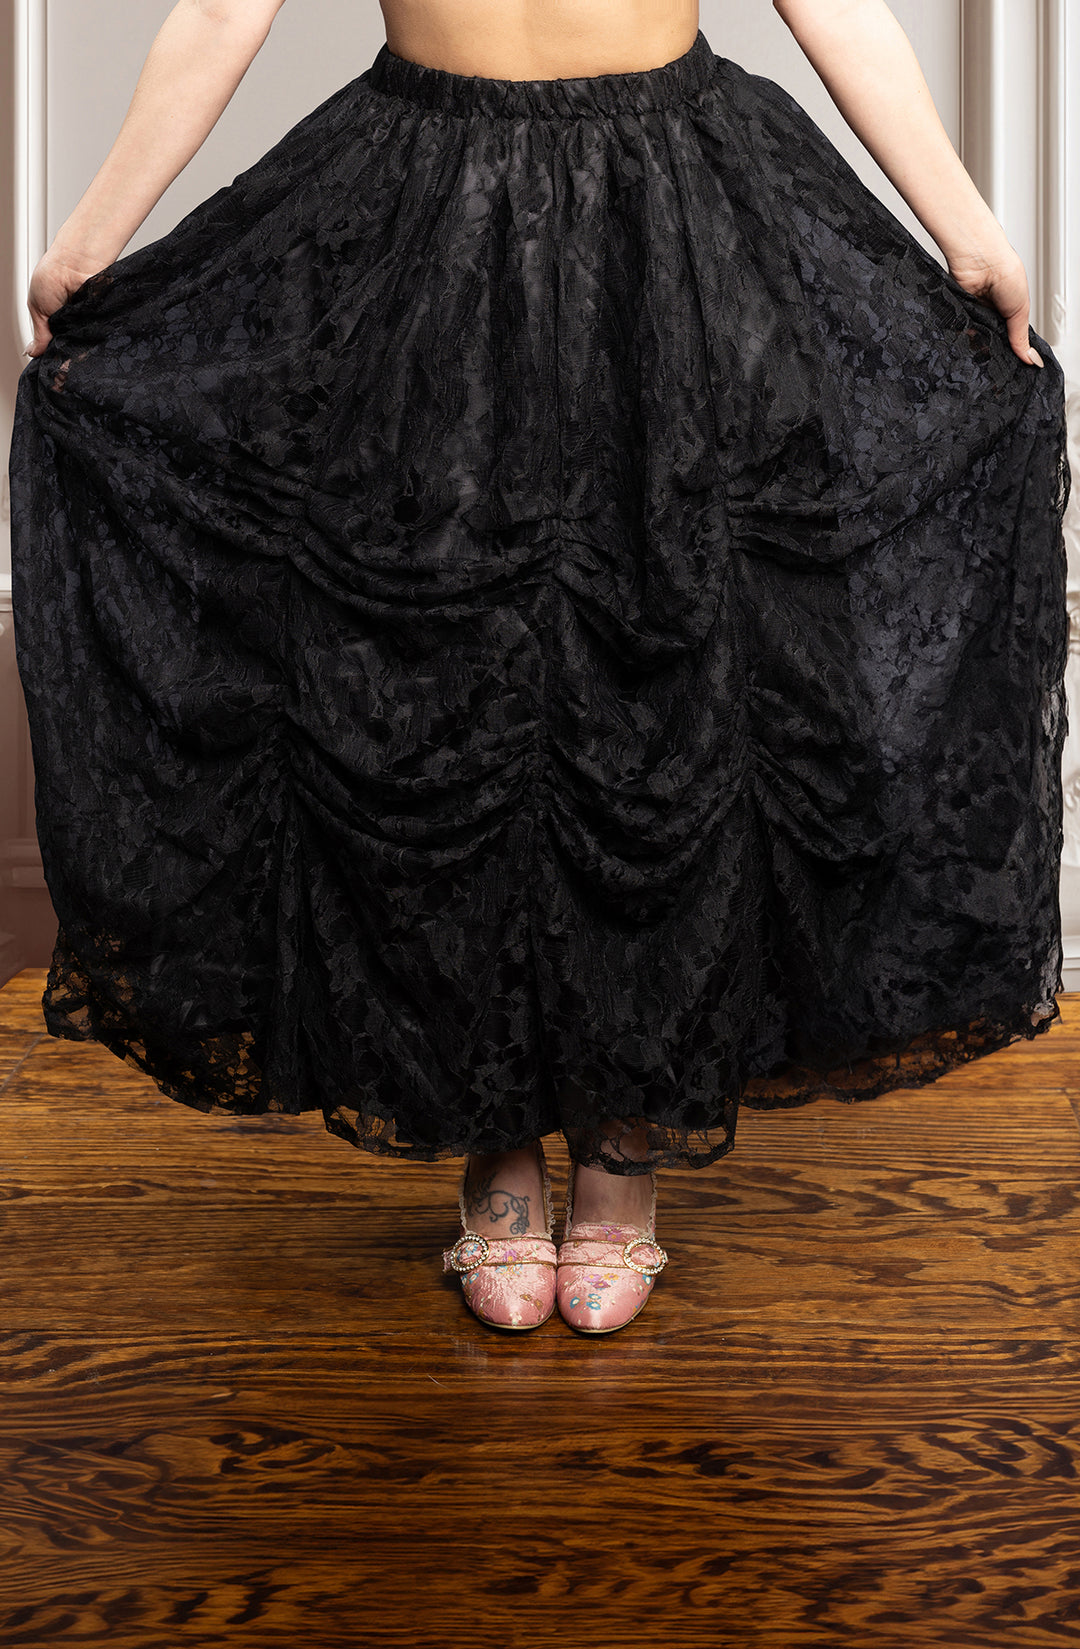 Black Lace Ball Gown Skirt